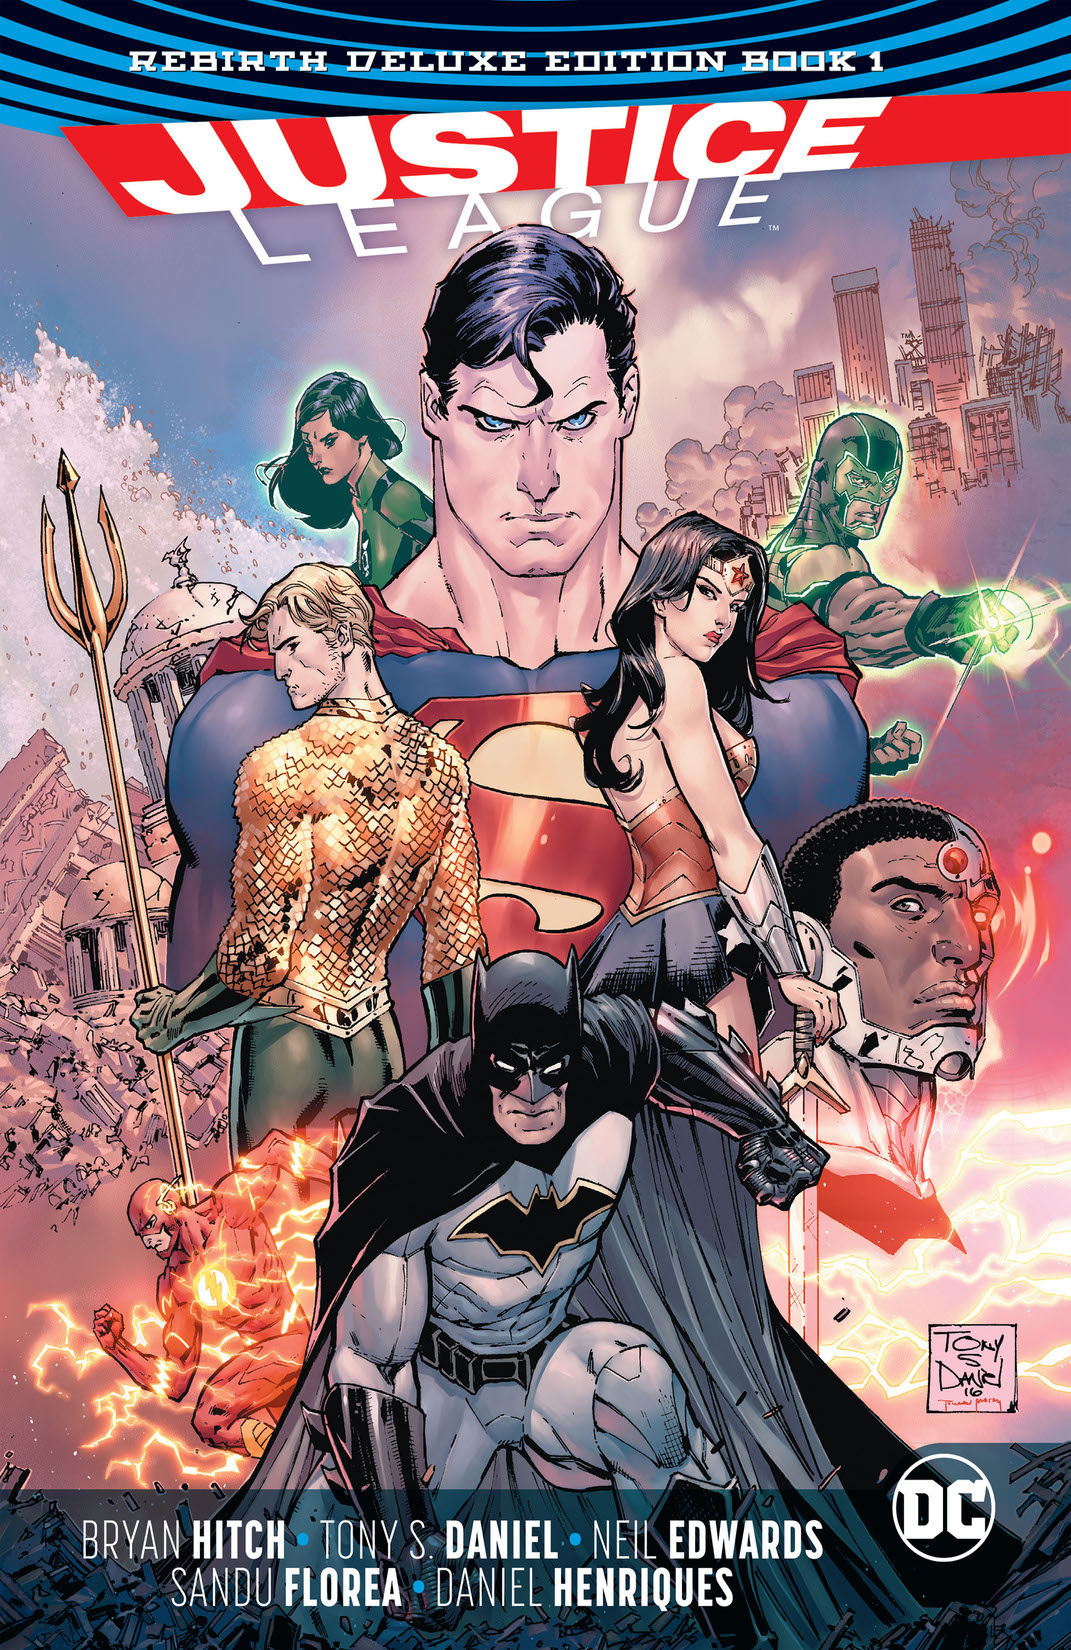 Justice League: The Rebirth Deluxe Edition Book 1 (Rebirth) preview images